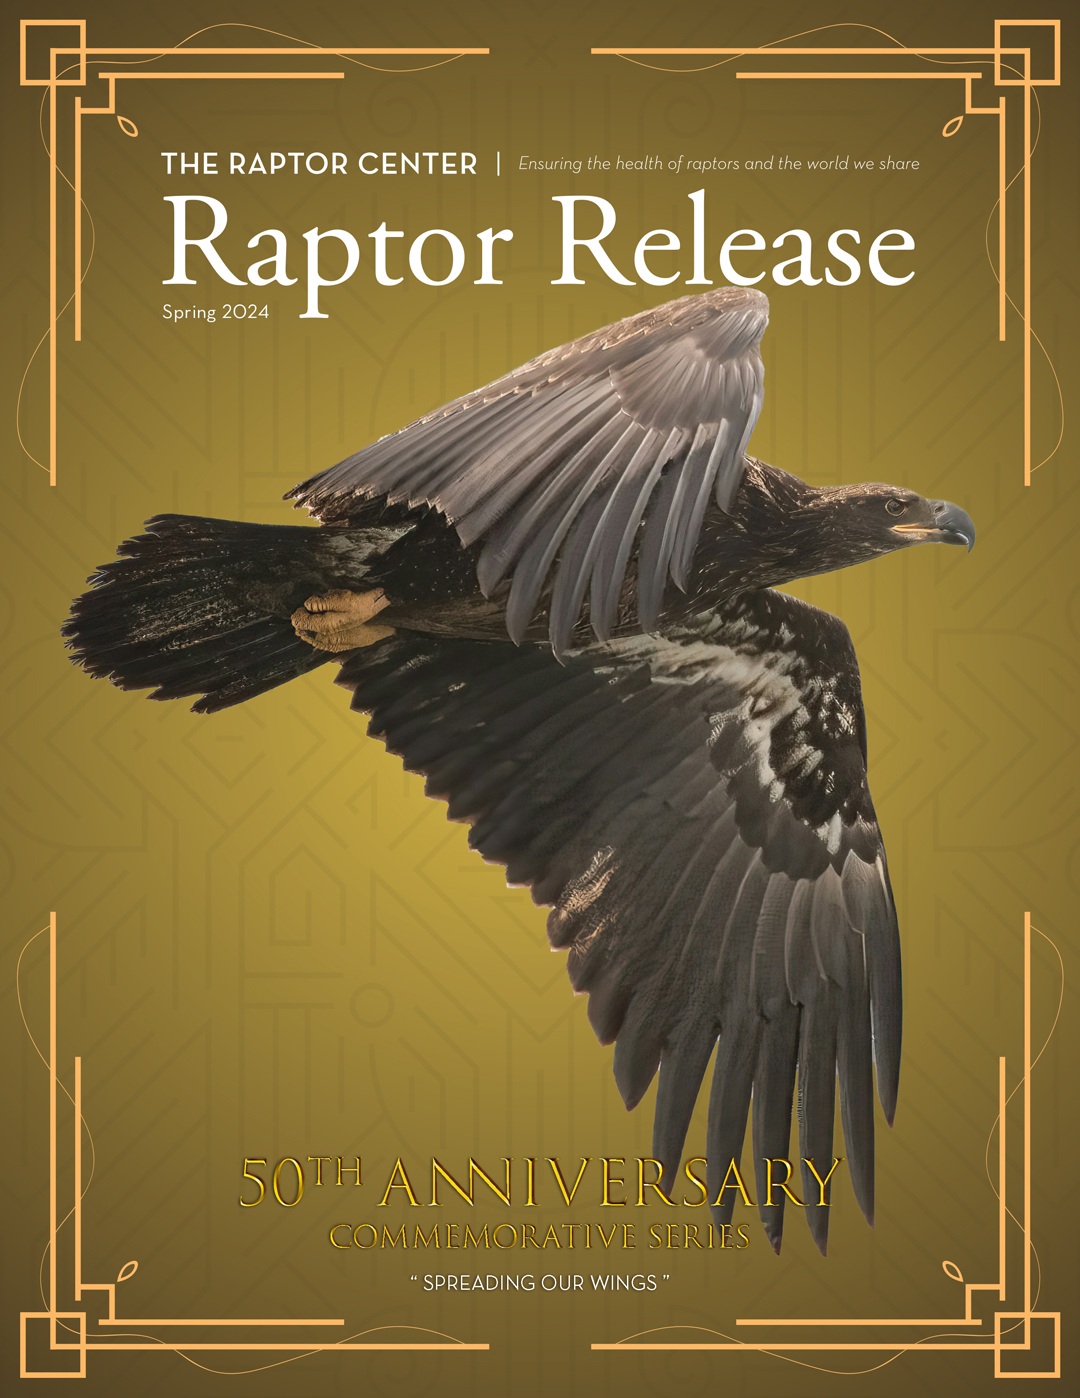 Raptor Release issue cover - Spring 2024